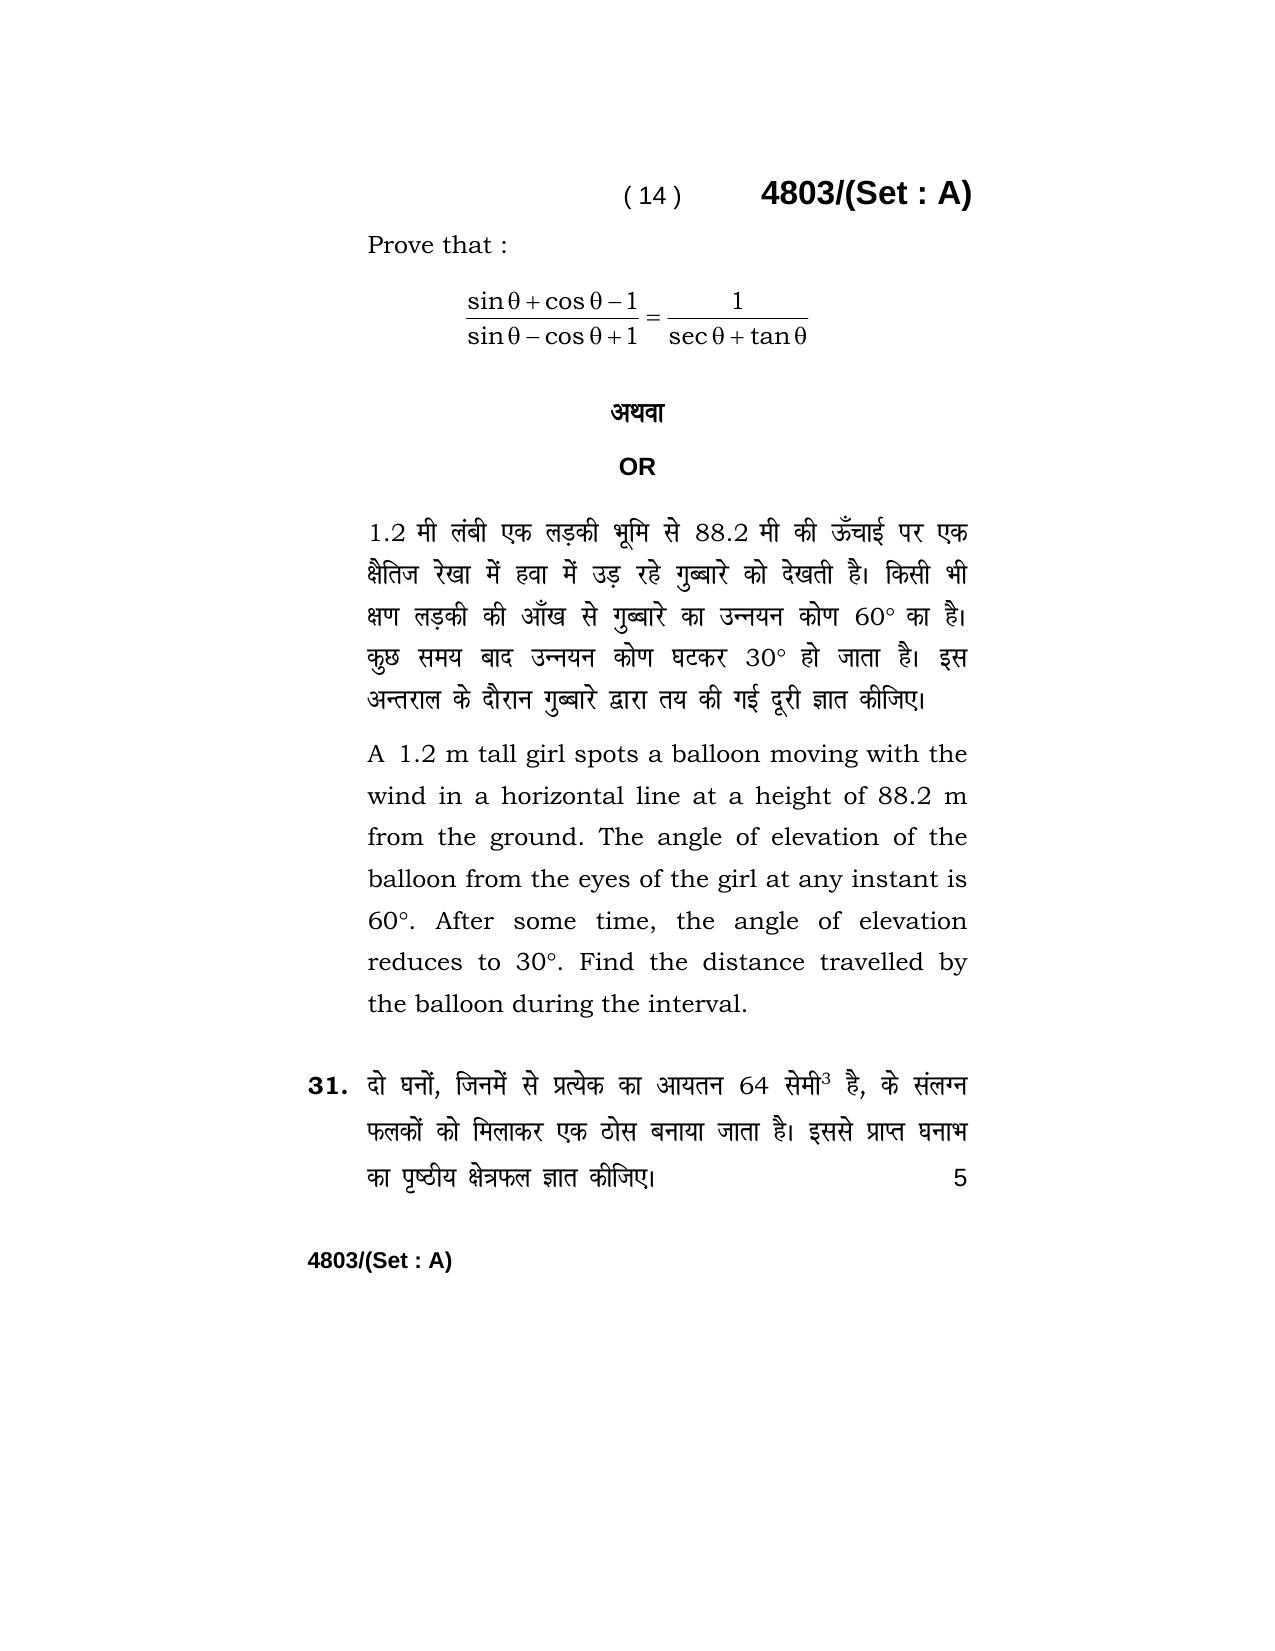 Haryana Board HBSE Class 10 Mathematics 2020 Question Paper - Page 14